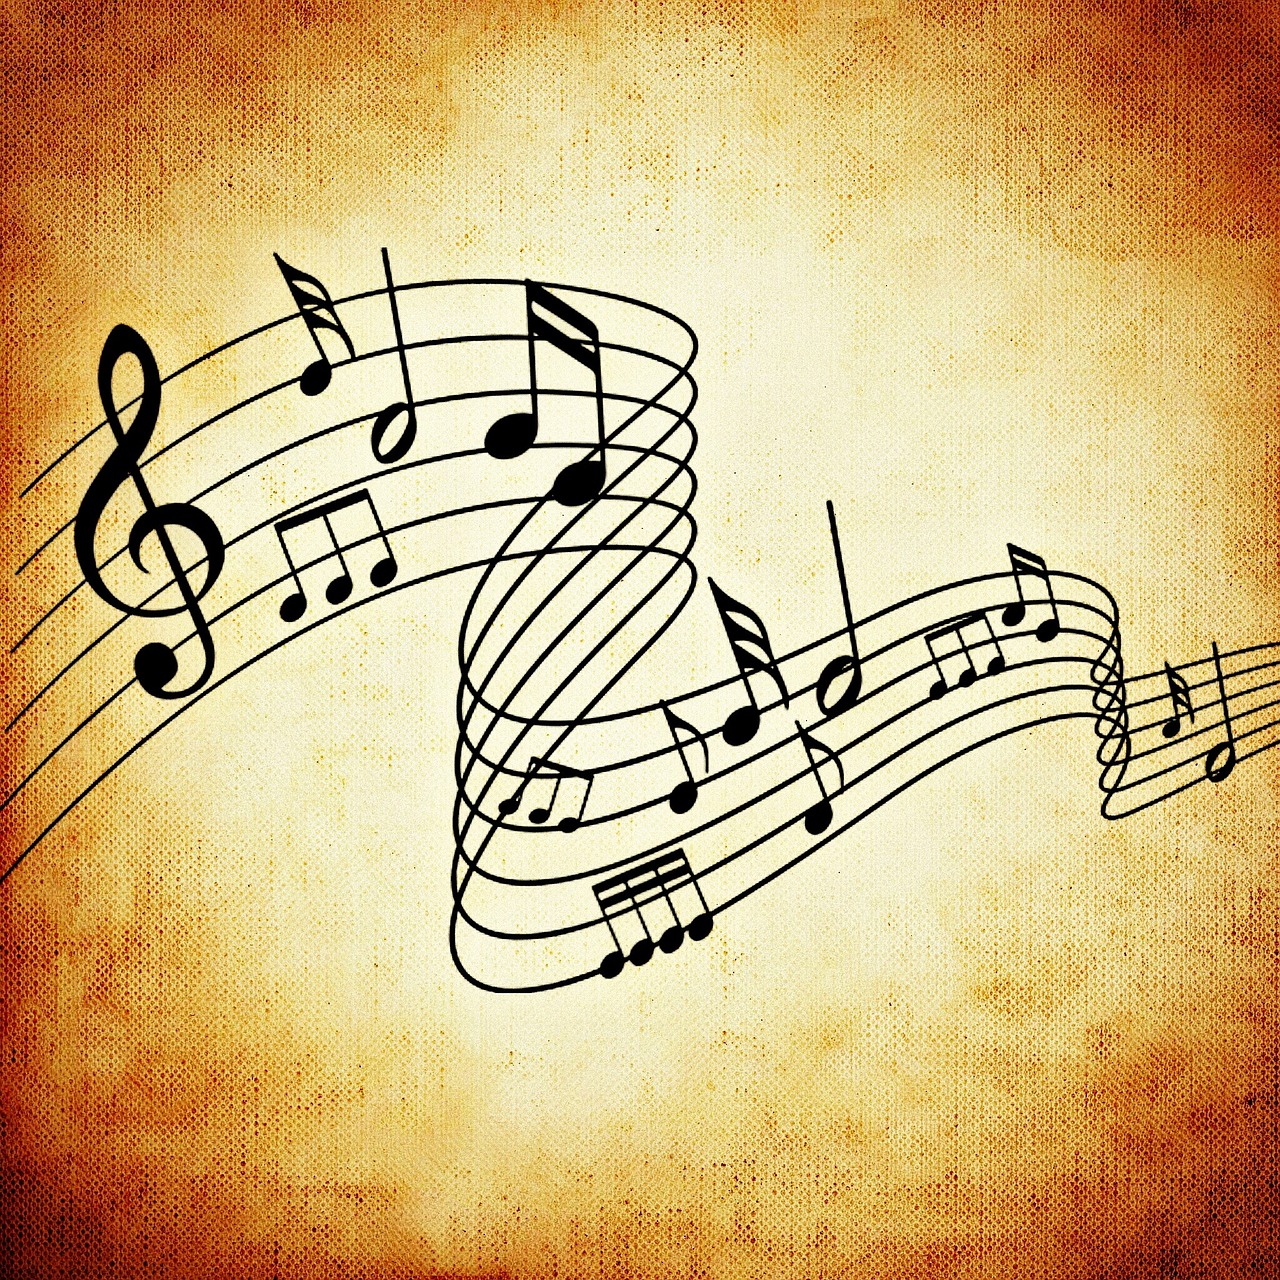 Music notes float on a banner with a tan and brown colored background.